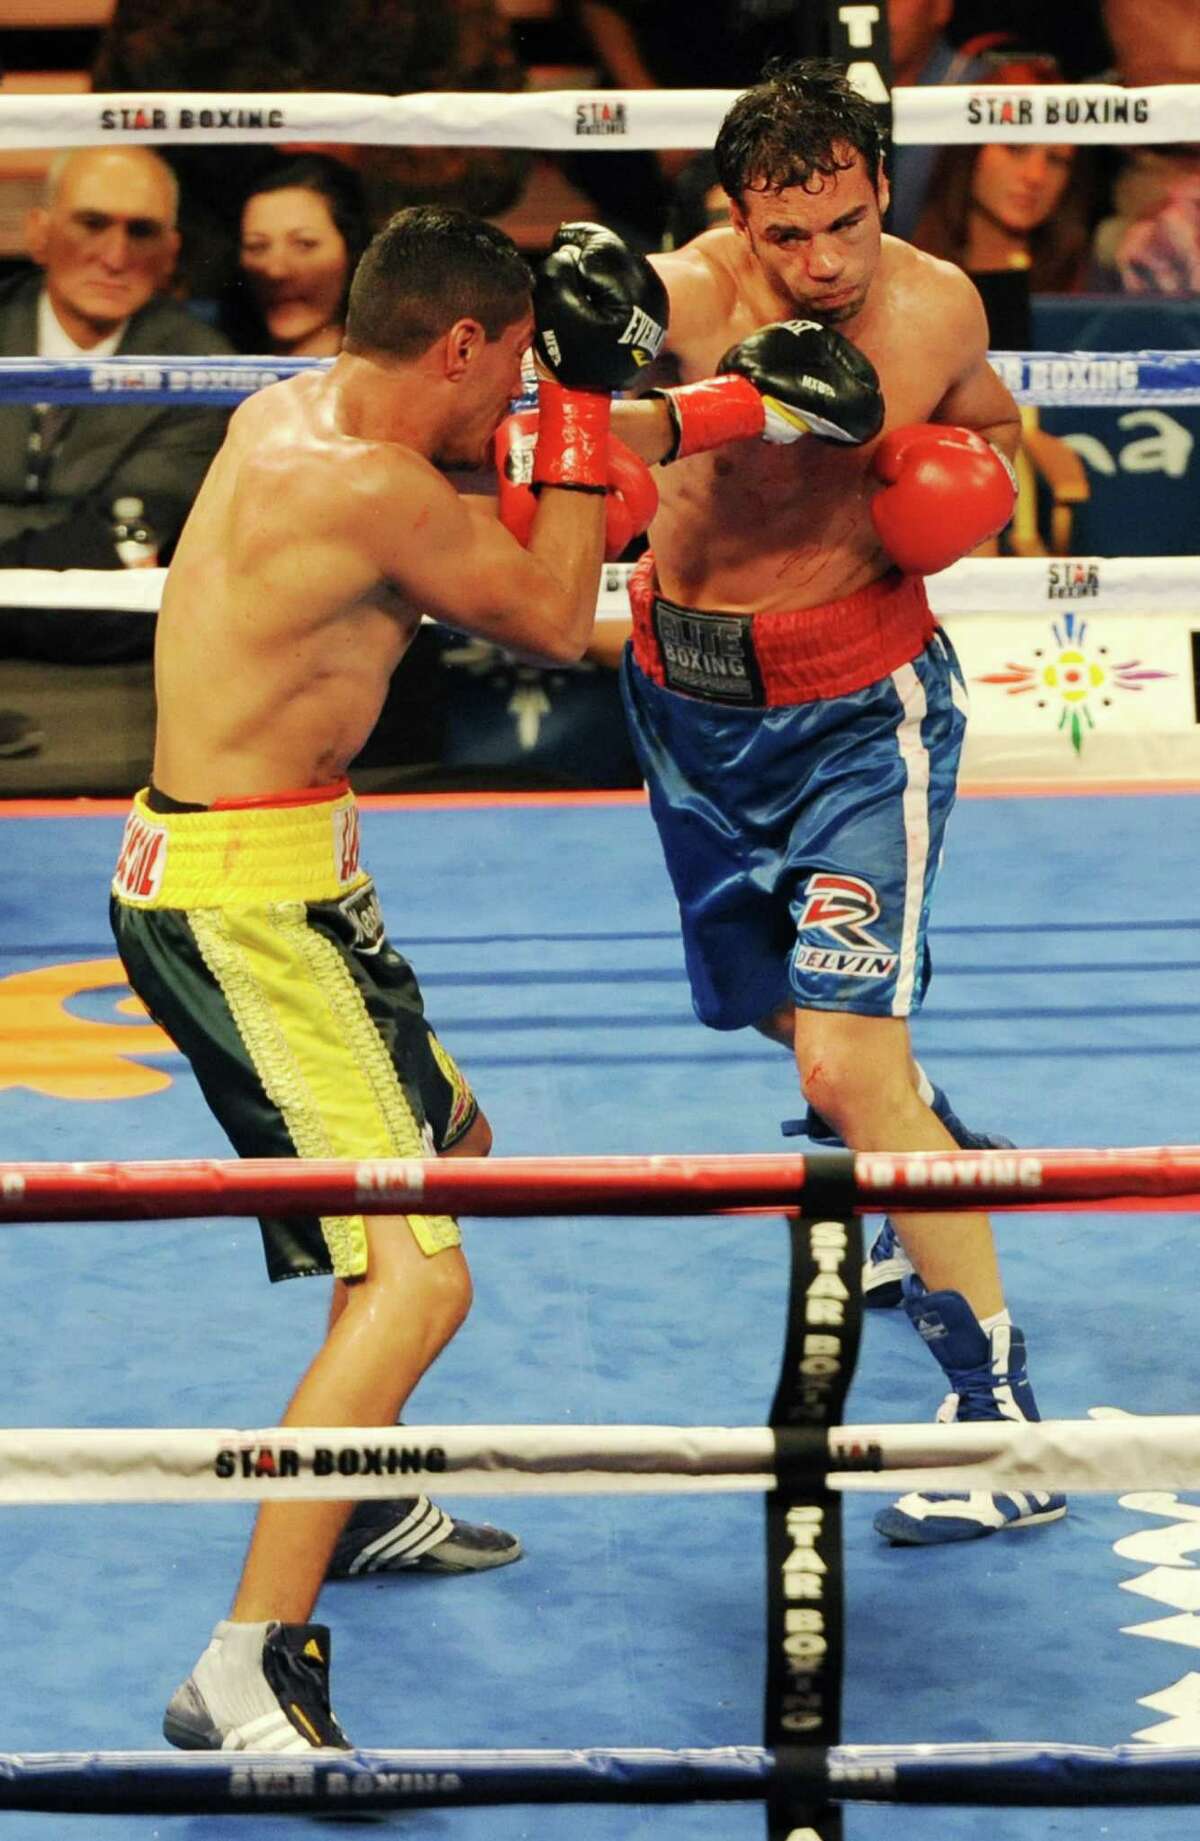 Danbury boxer Delvin Rodriguez, right, fights Freddy Hernandez for the IBF North American junior-middleweight title in the main event of ESPN's "Friday Night Fights" at the Mohegan Sun Casino in Uncasville, Conn. on Friday, May 24, 2013.